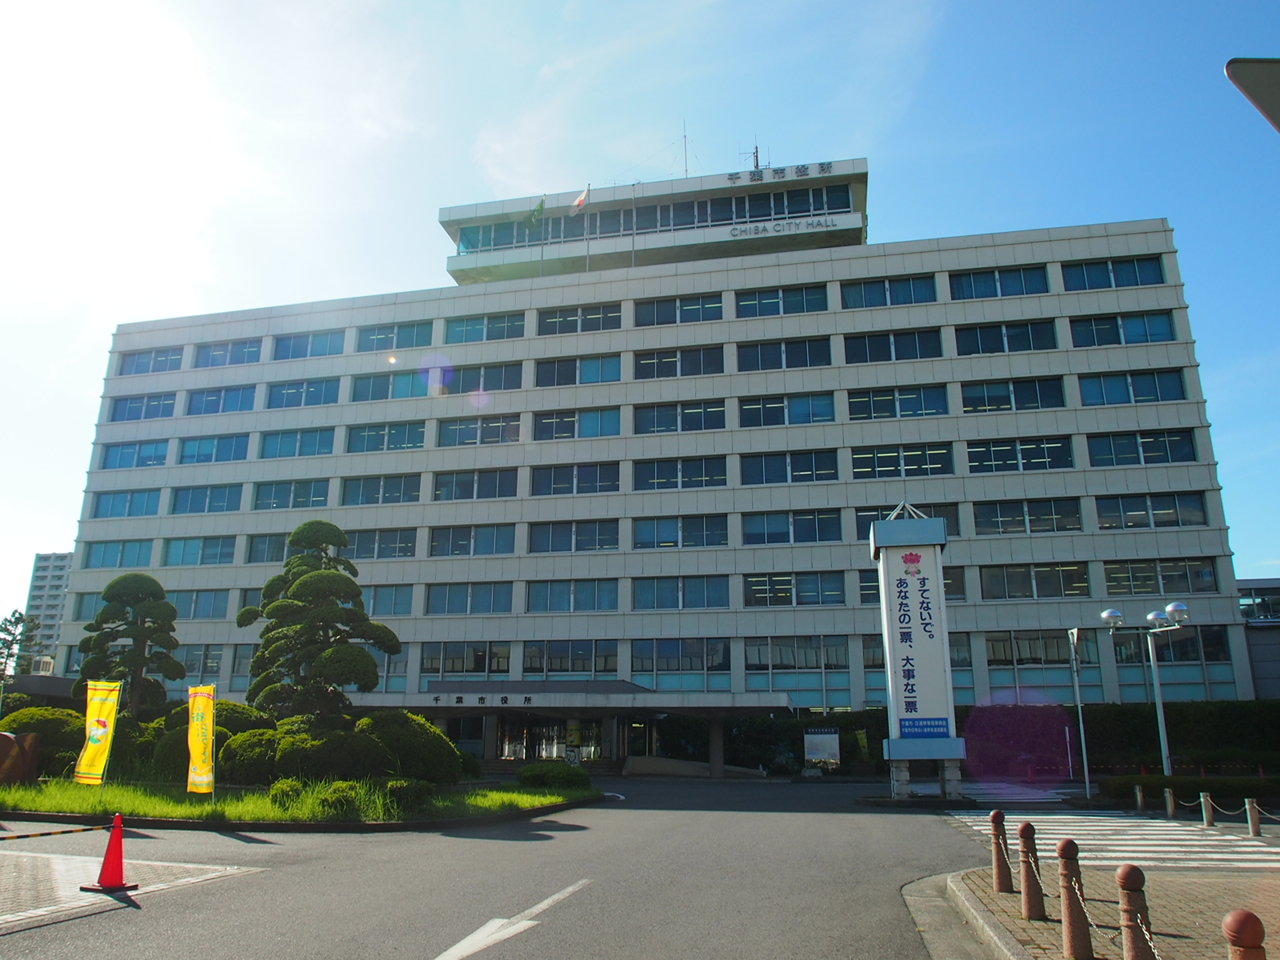 Government office. 1427m to Chiba City Hall (government office)